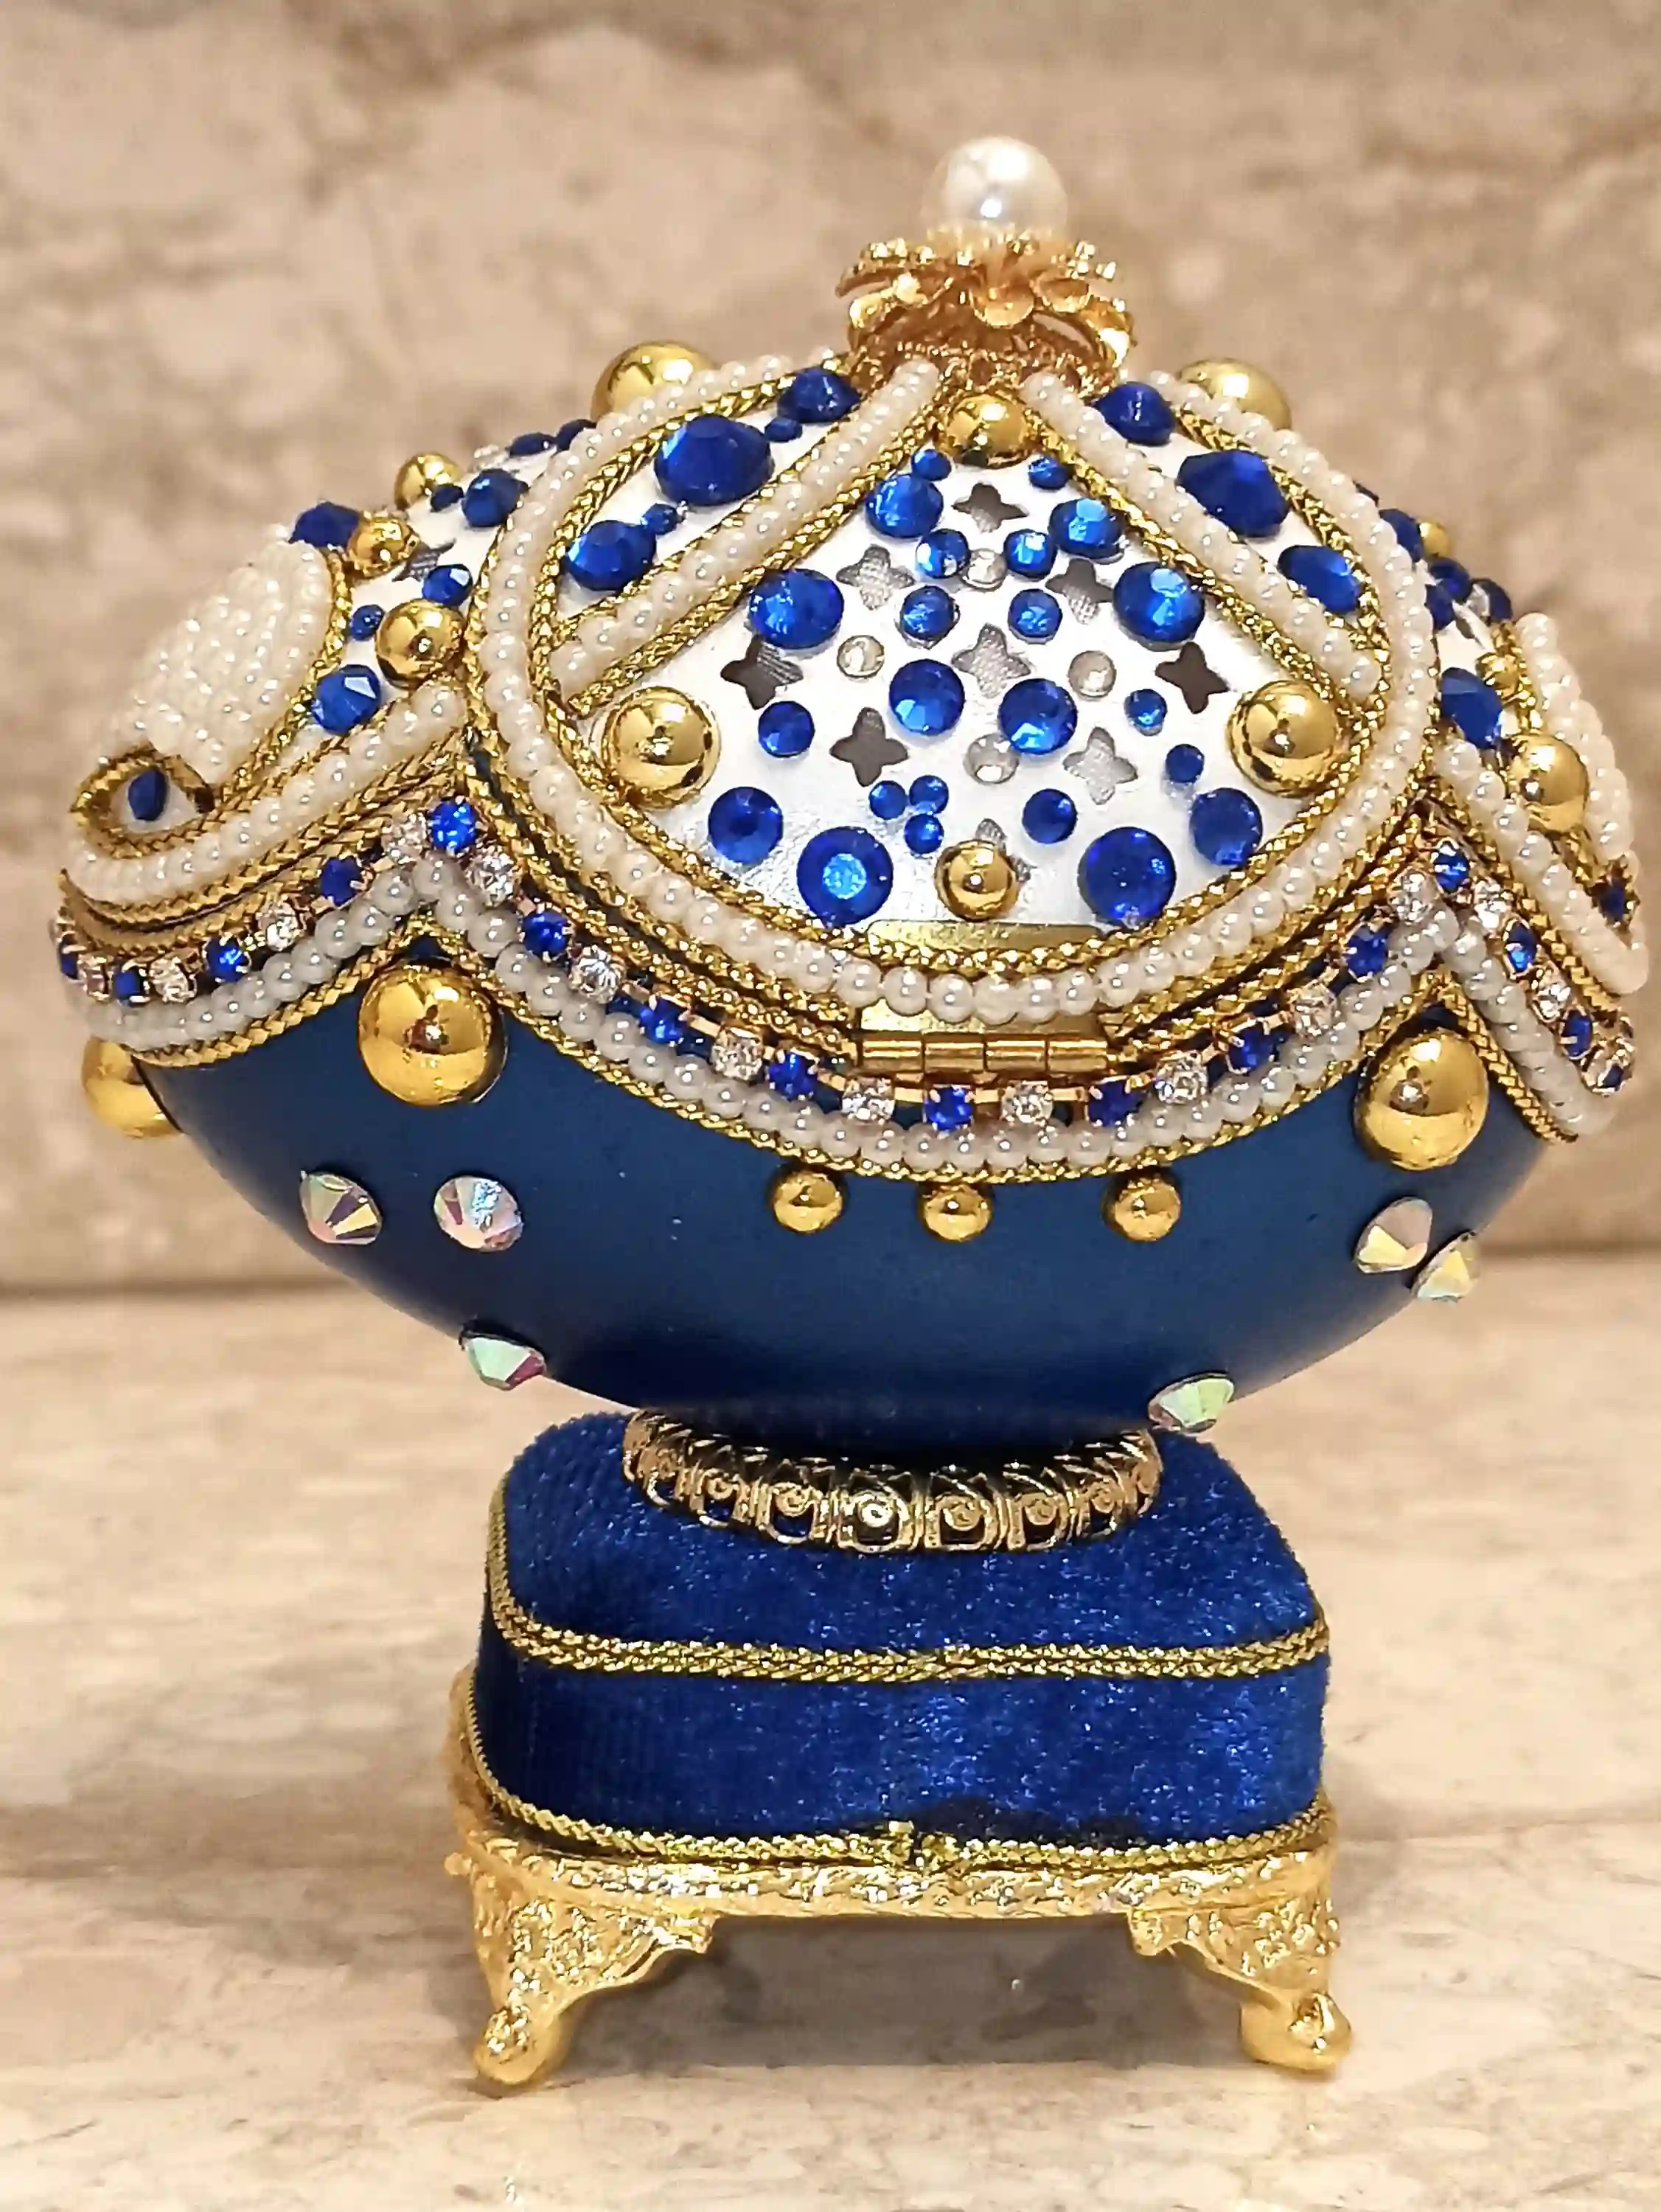 RARE-Limited Edition-Faberge Egg- Faberge Easter Egg-Faberge Style Egg-Faberge egg Trinket Box-Faberge Egg Music Box-24k GOLD-Sapphire Gift 